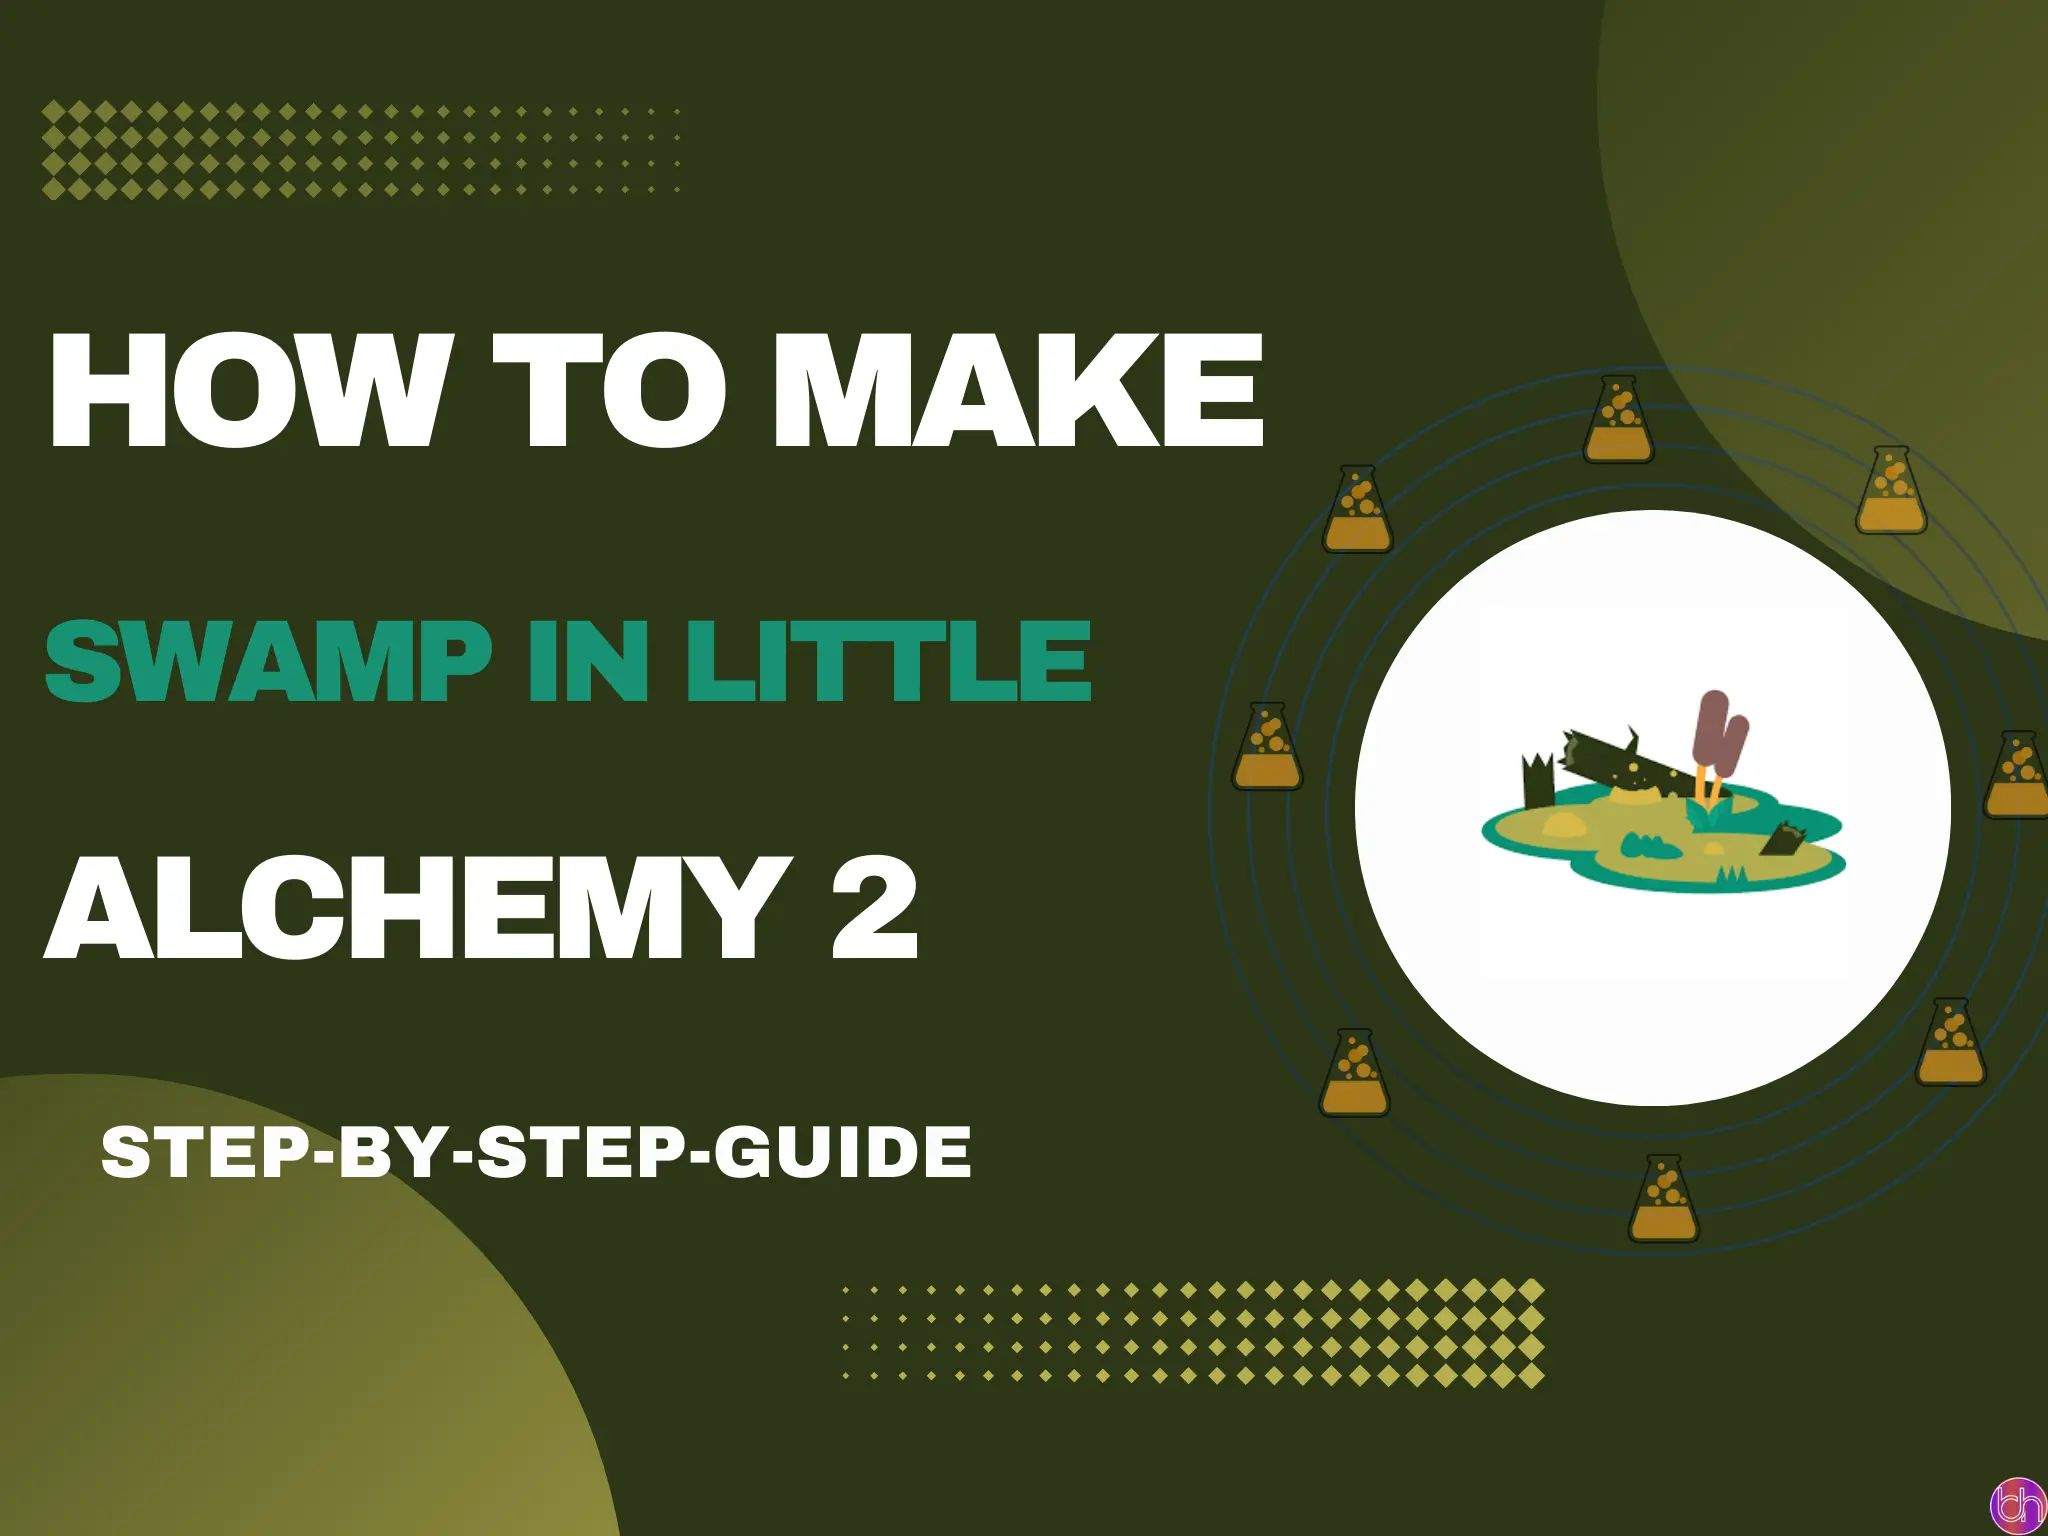 How to make Swamp in little alchemy 2